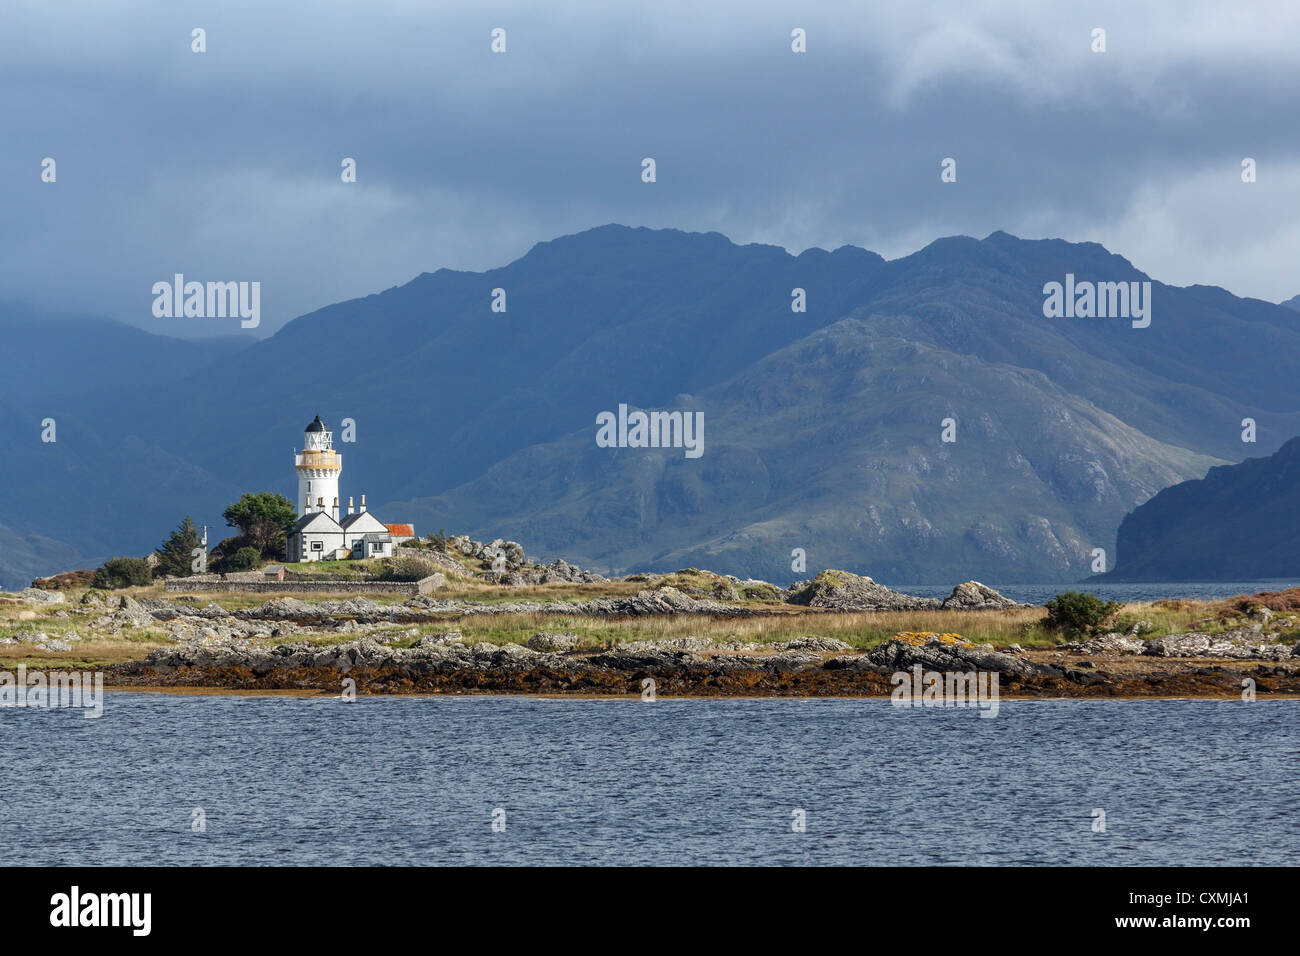 Old traditional lighthouse on Isle Ornsay on Skye with mountains on the Scottish mainland beyond. Stock Photo